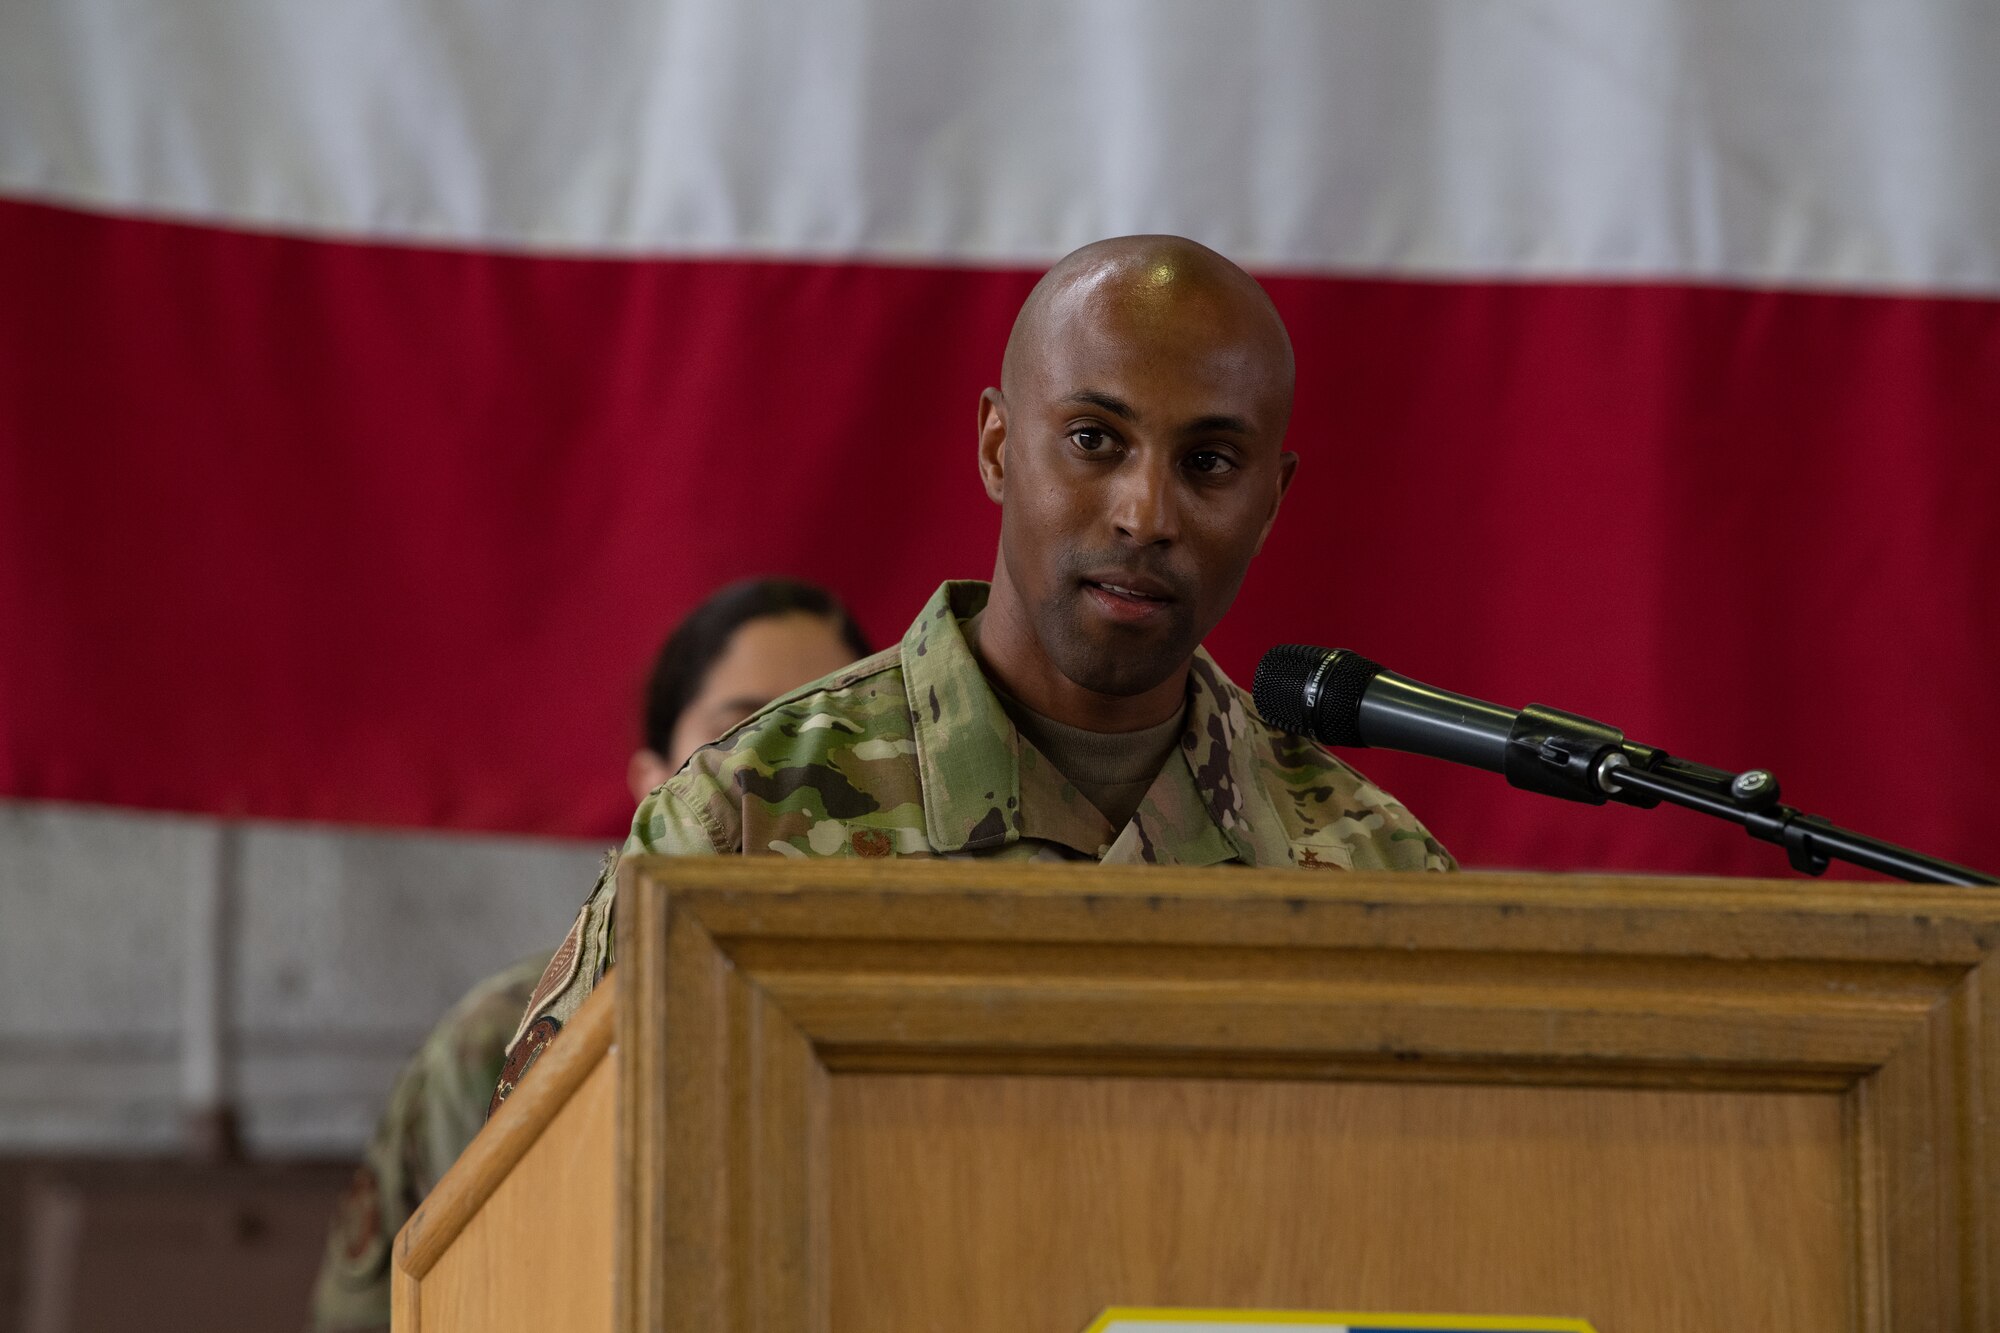 U.S. Air Force Maj. Lee Washington, the 52nd Comptroller Squadron commander, addresses the crowd at the 52nd CPTS change of command ceremony at Spangdahlem Air Base, Germany, June 30, 2021. The CPTS is responsible for the purchasing and financial allocation needs of the 52nd FW. (U.S. Air Force photo by Senior Airman Ali Stewart)